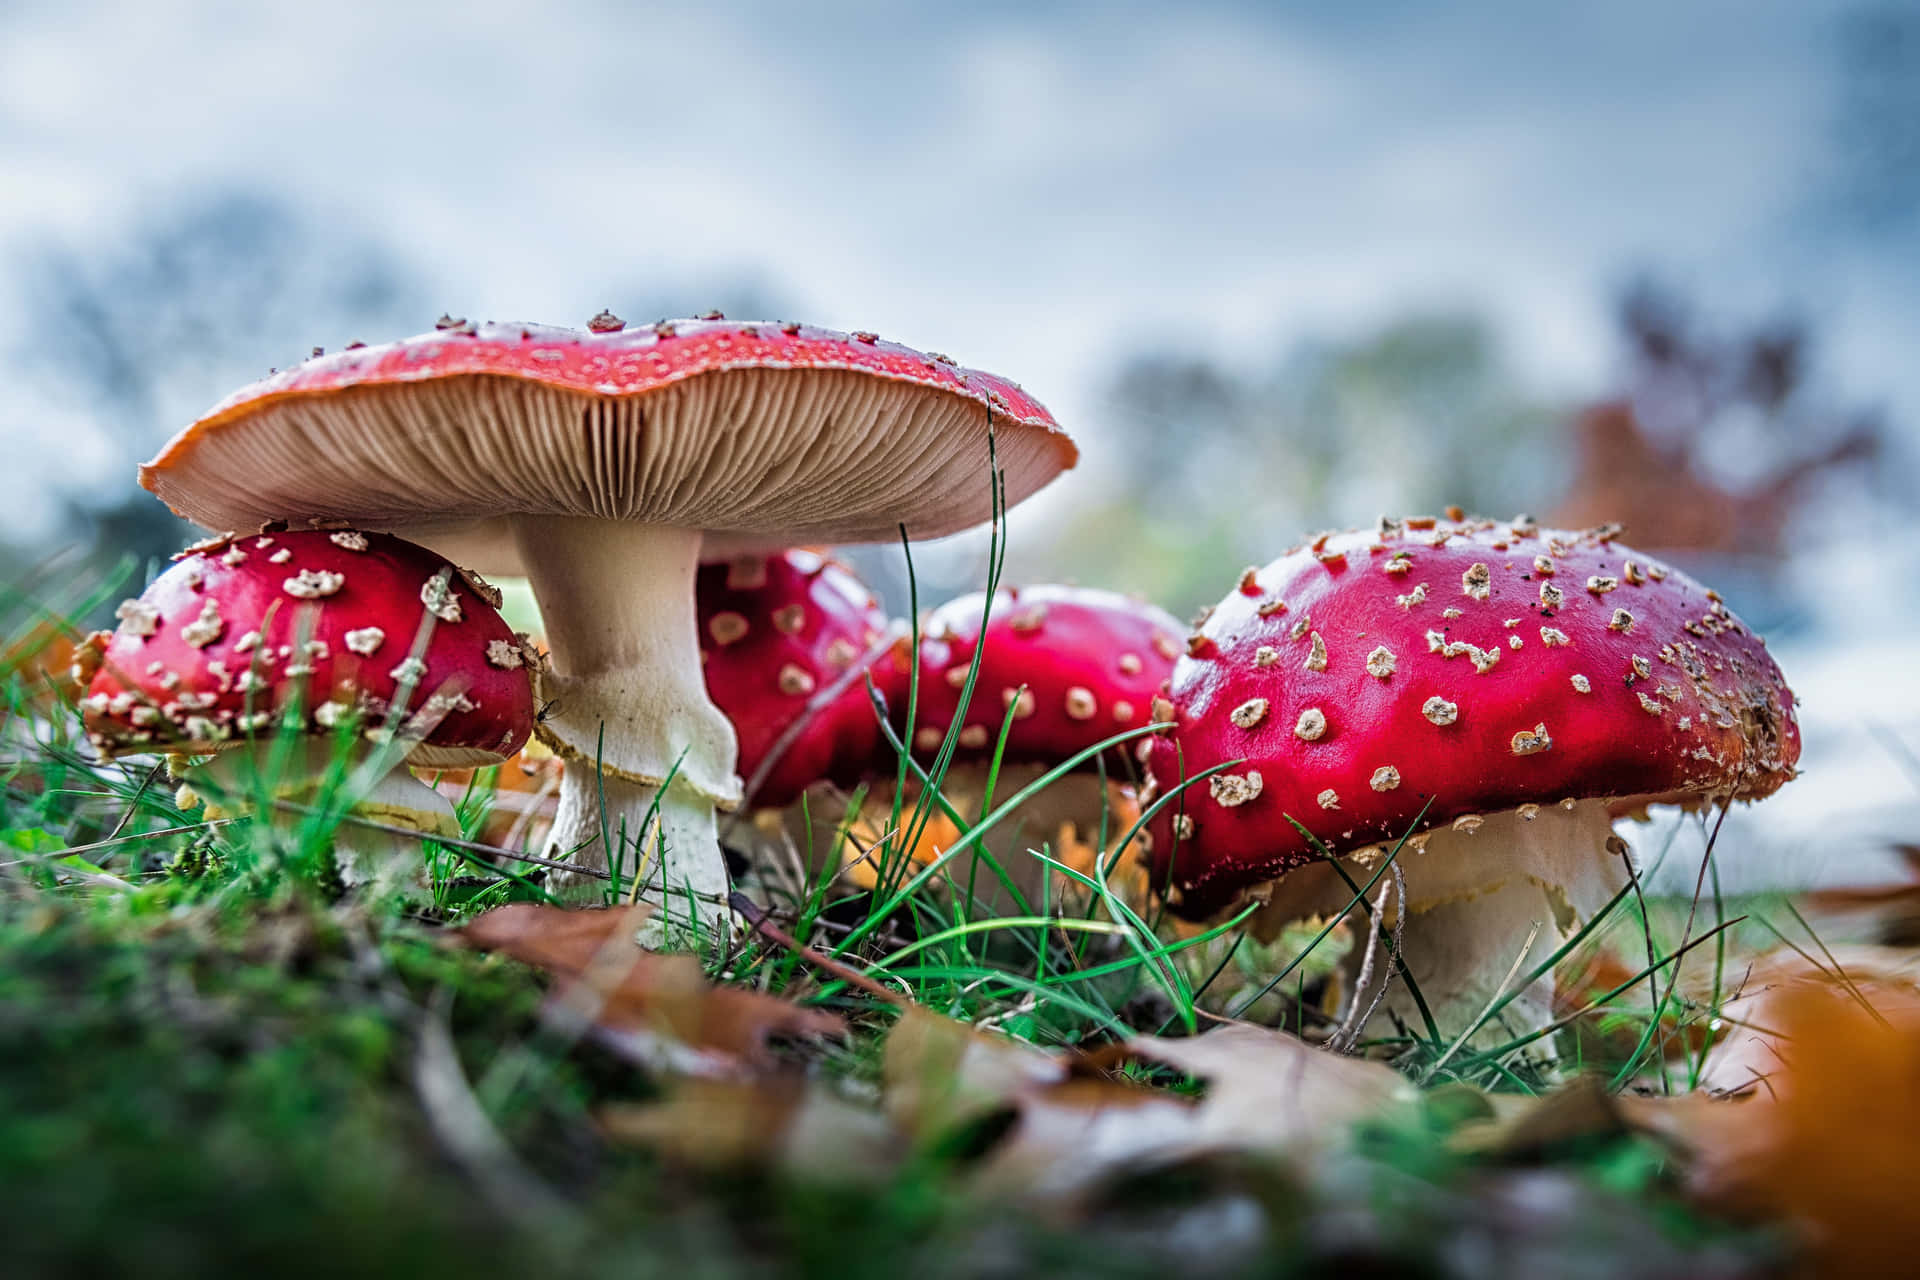 Red Mushrooms In The Grass With Leaves